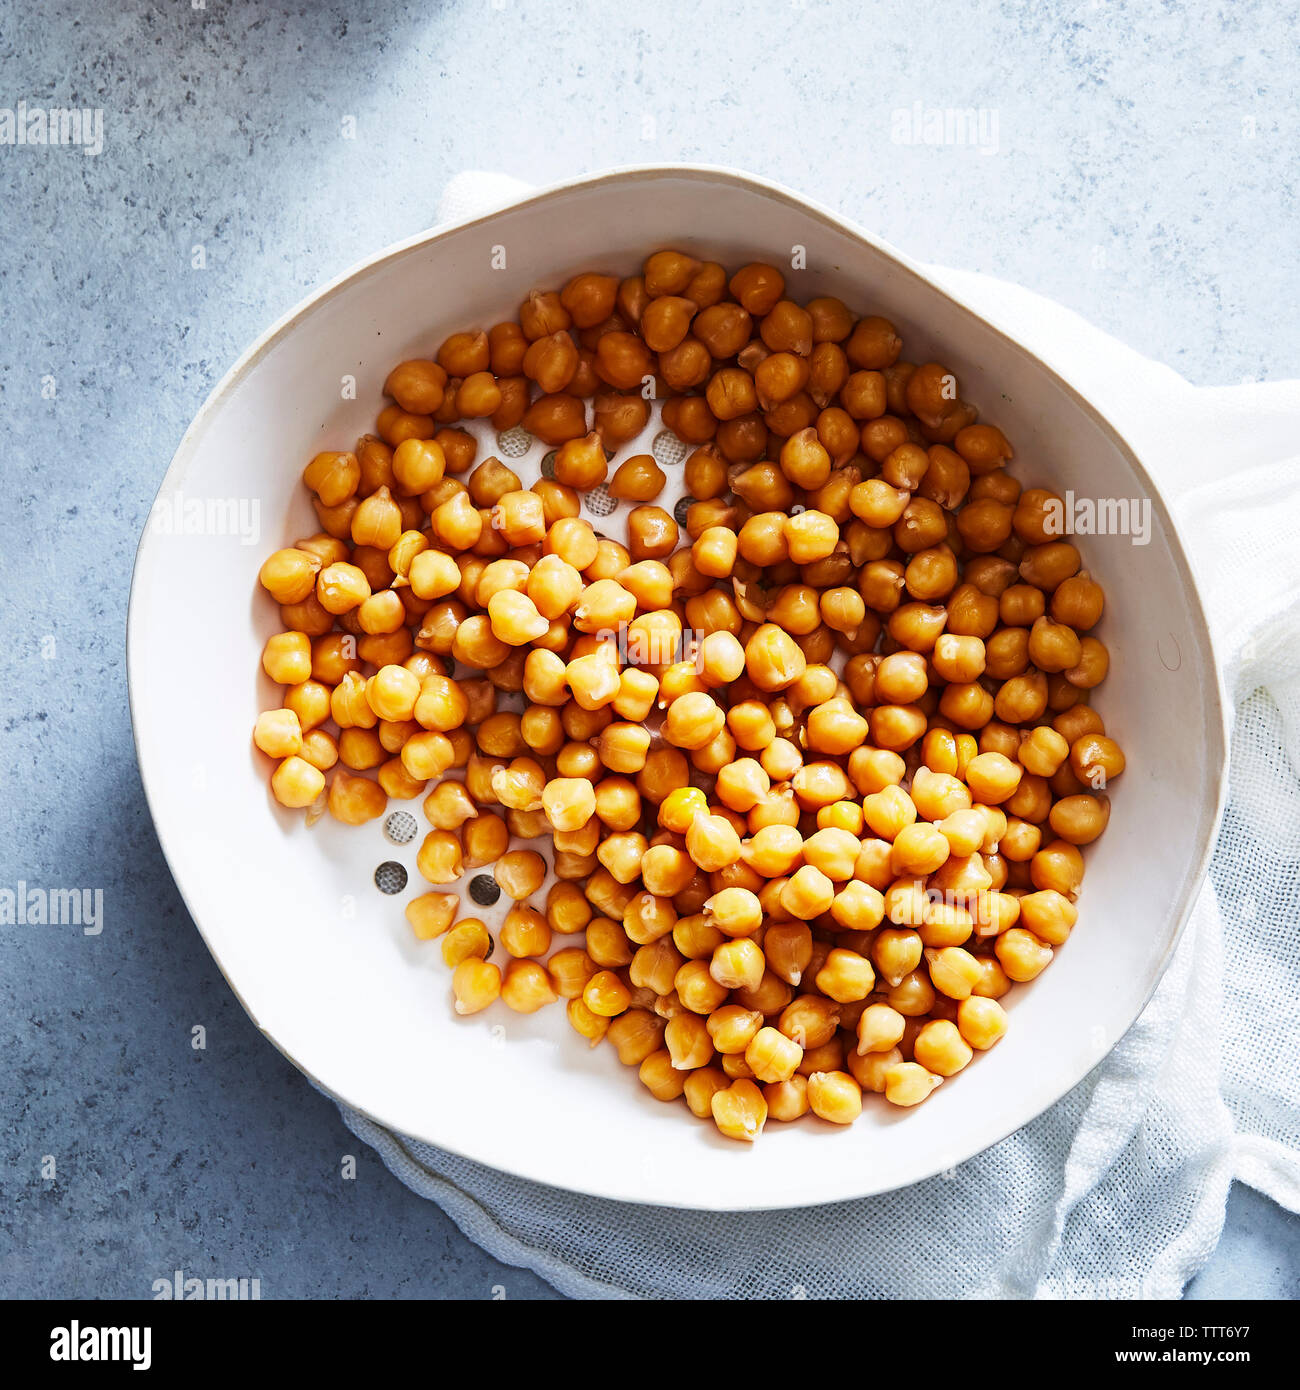 Overhead view of chick-peas in bowl with napkin on table Stock Photo